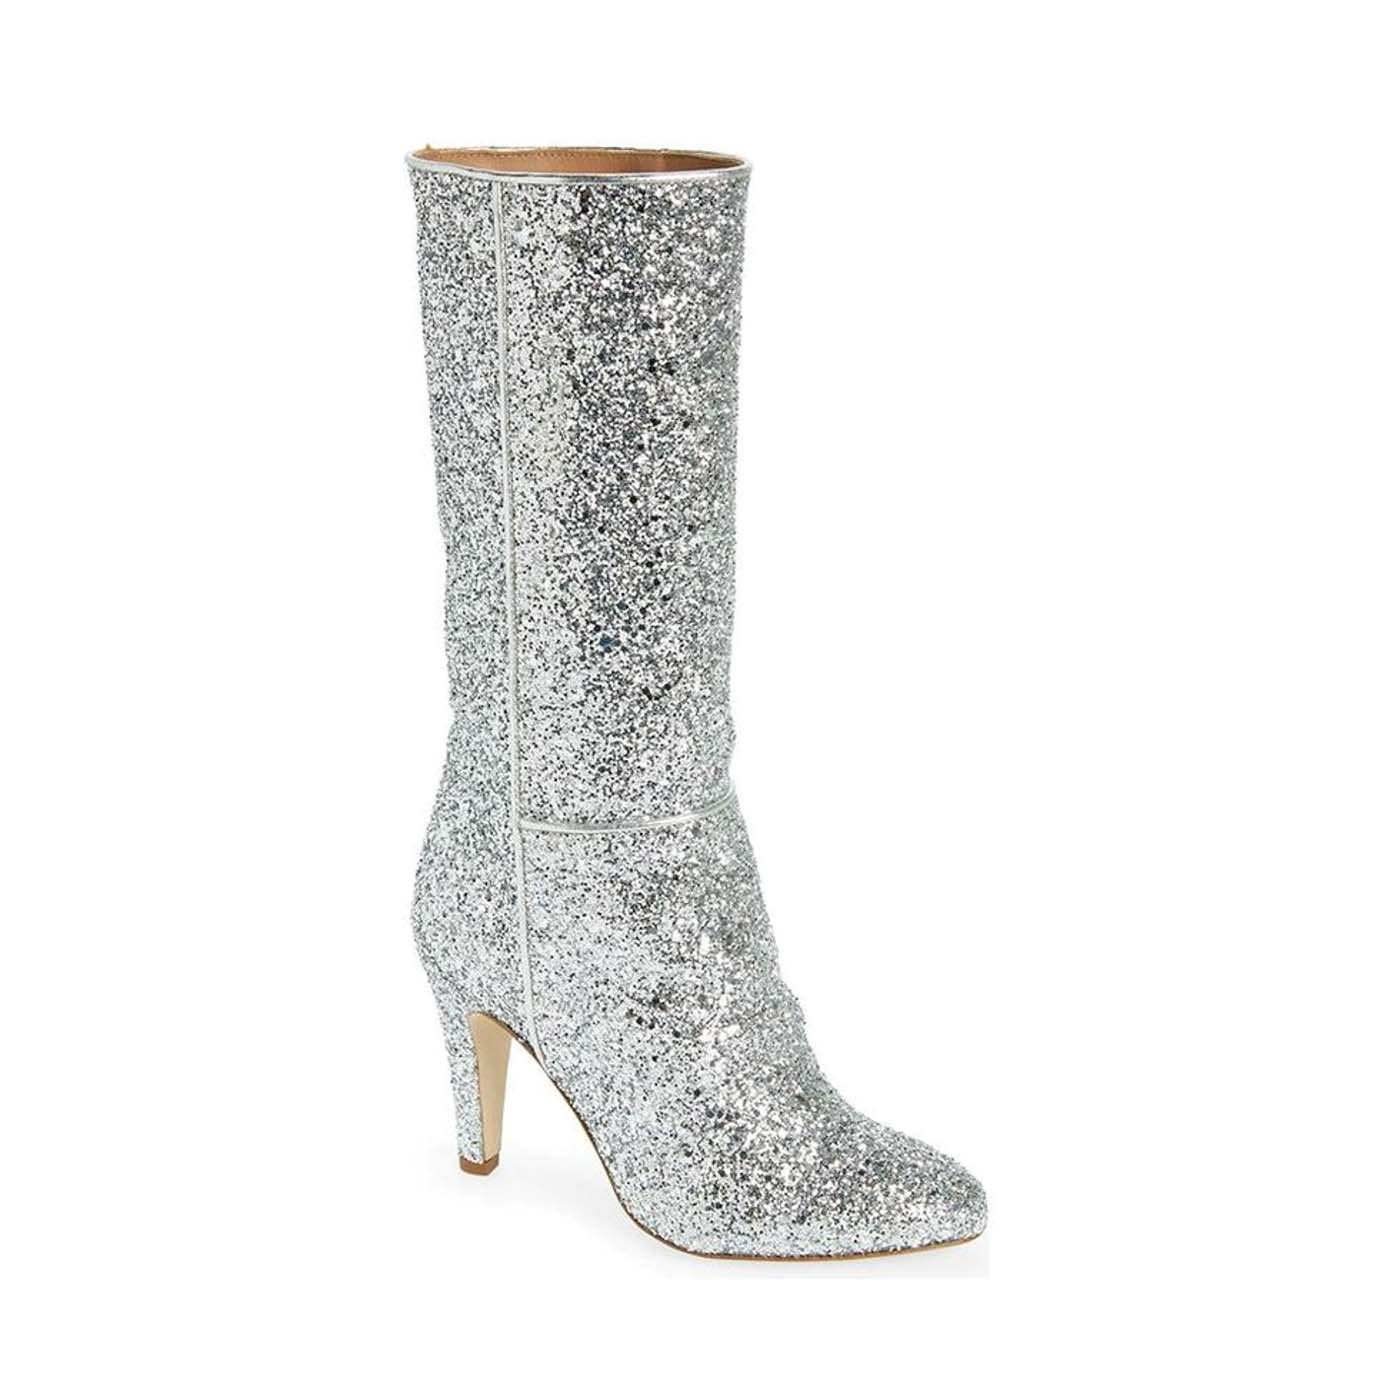 32 6. Brother Vellies Elevator Glitter Boot